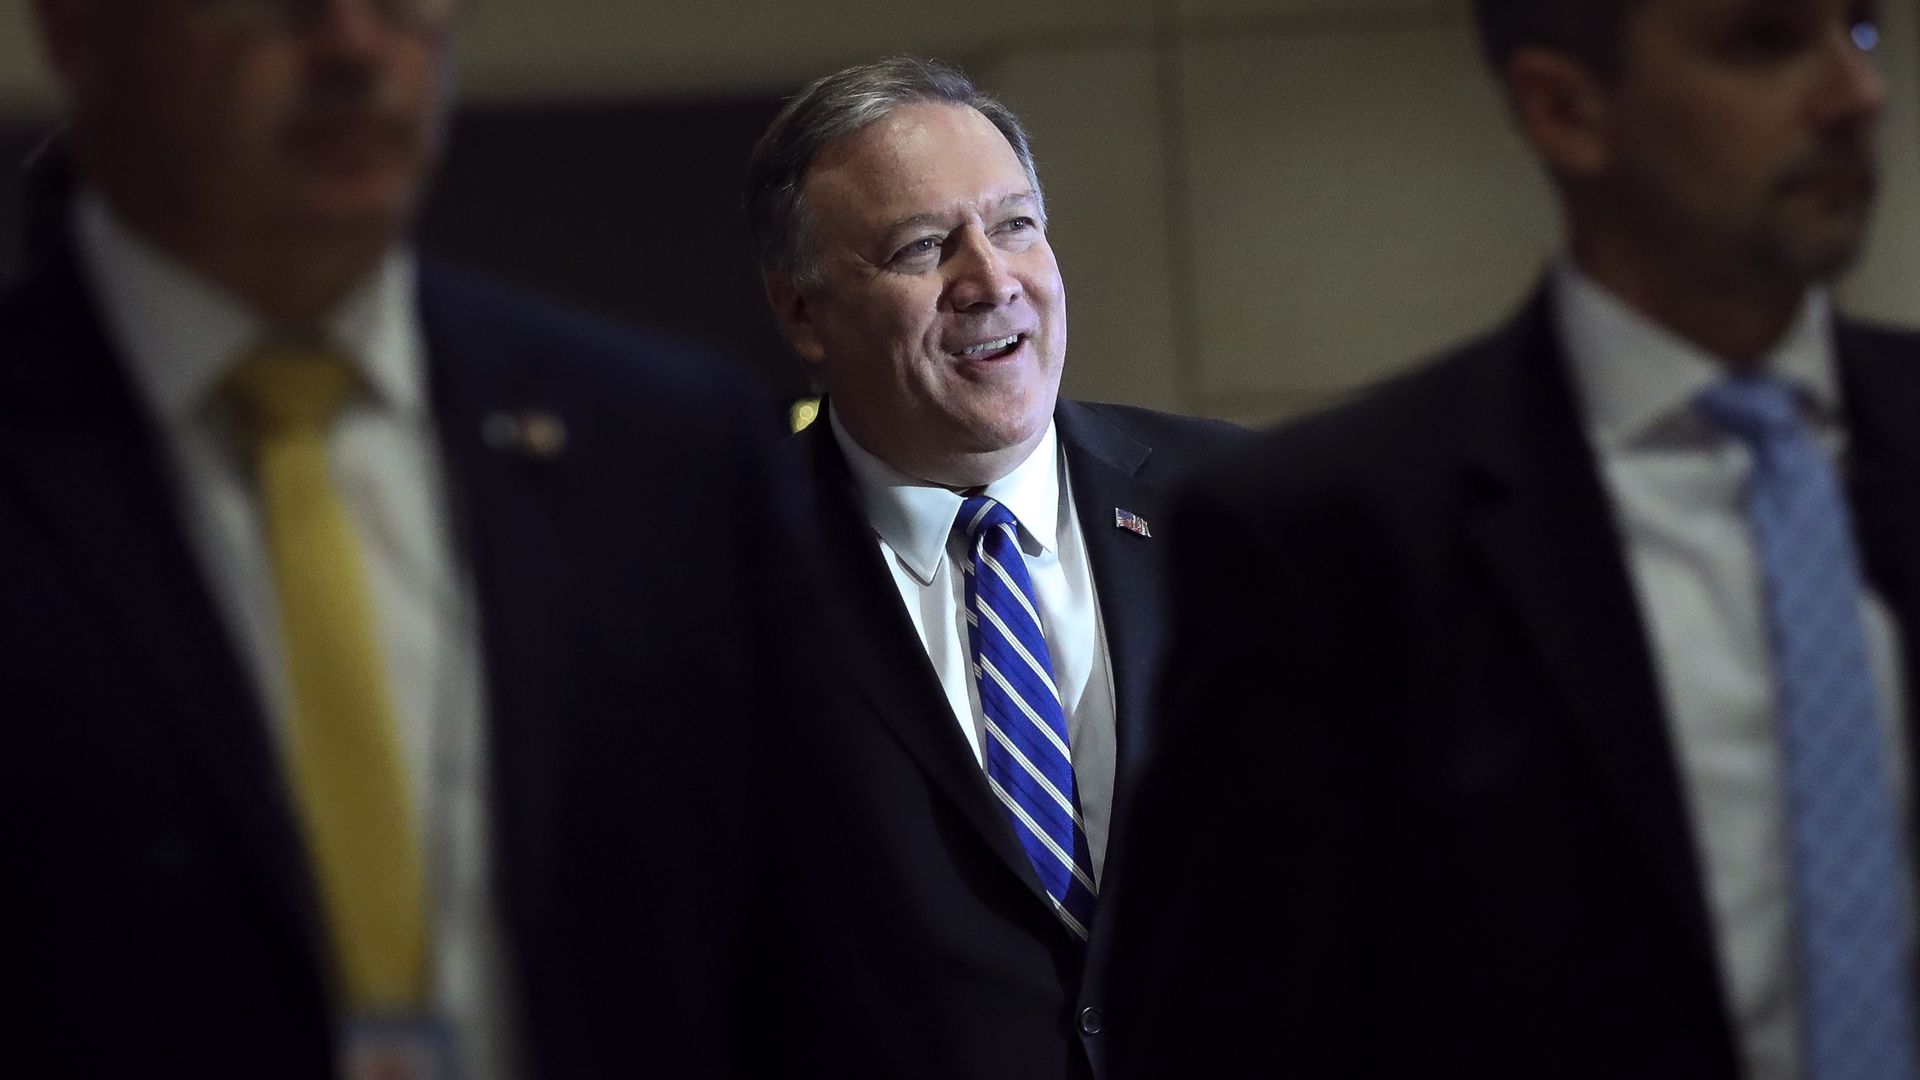 In this image, Secretary of State Mike Pompeo stands in a suit and tie and walks between two men 